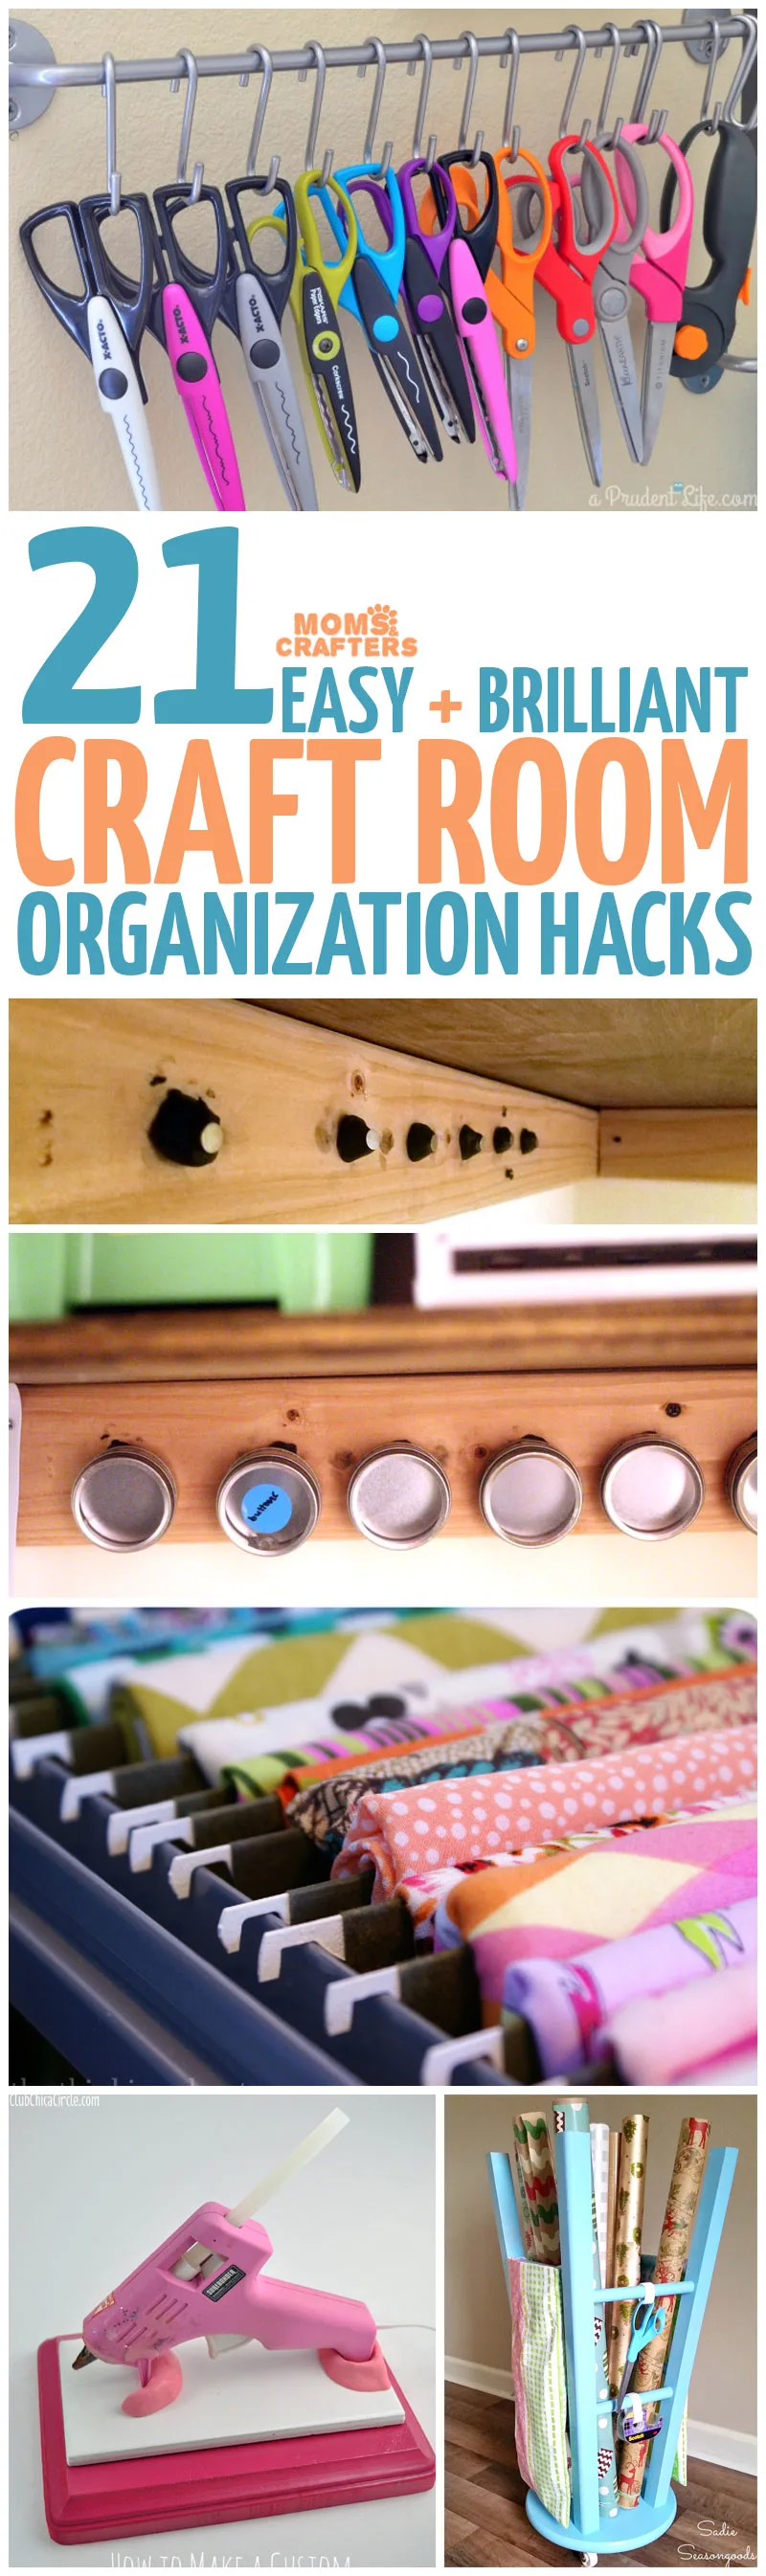 Craft Room Organization Hacks 21 Brilliant Ideas To Try Today